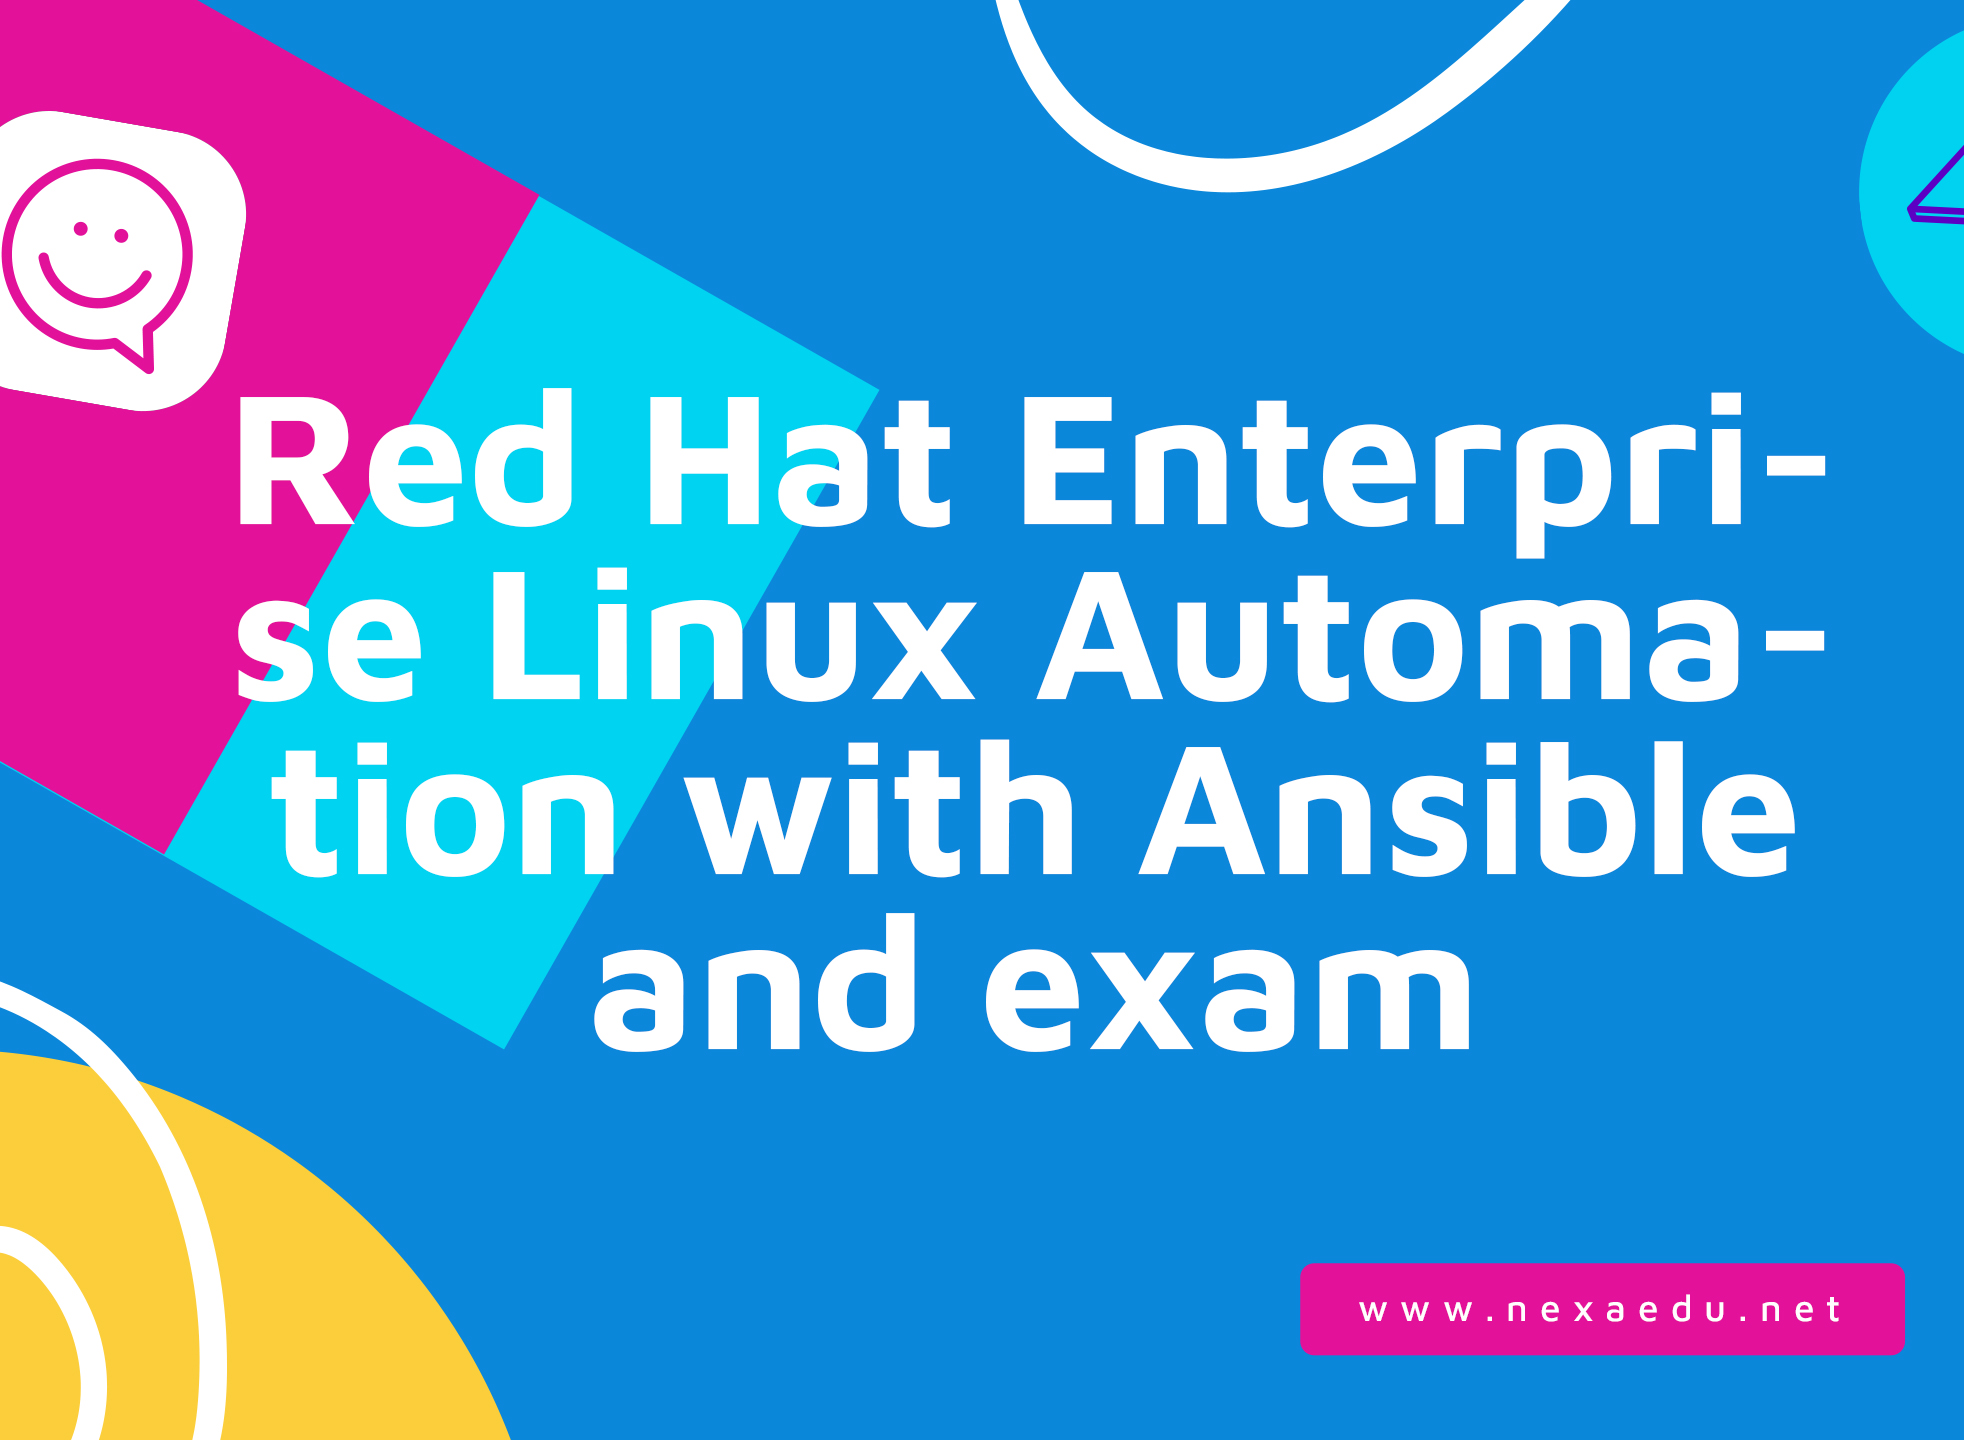 Red Hat Enterprise Linux Automation with Ansible and exam